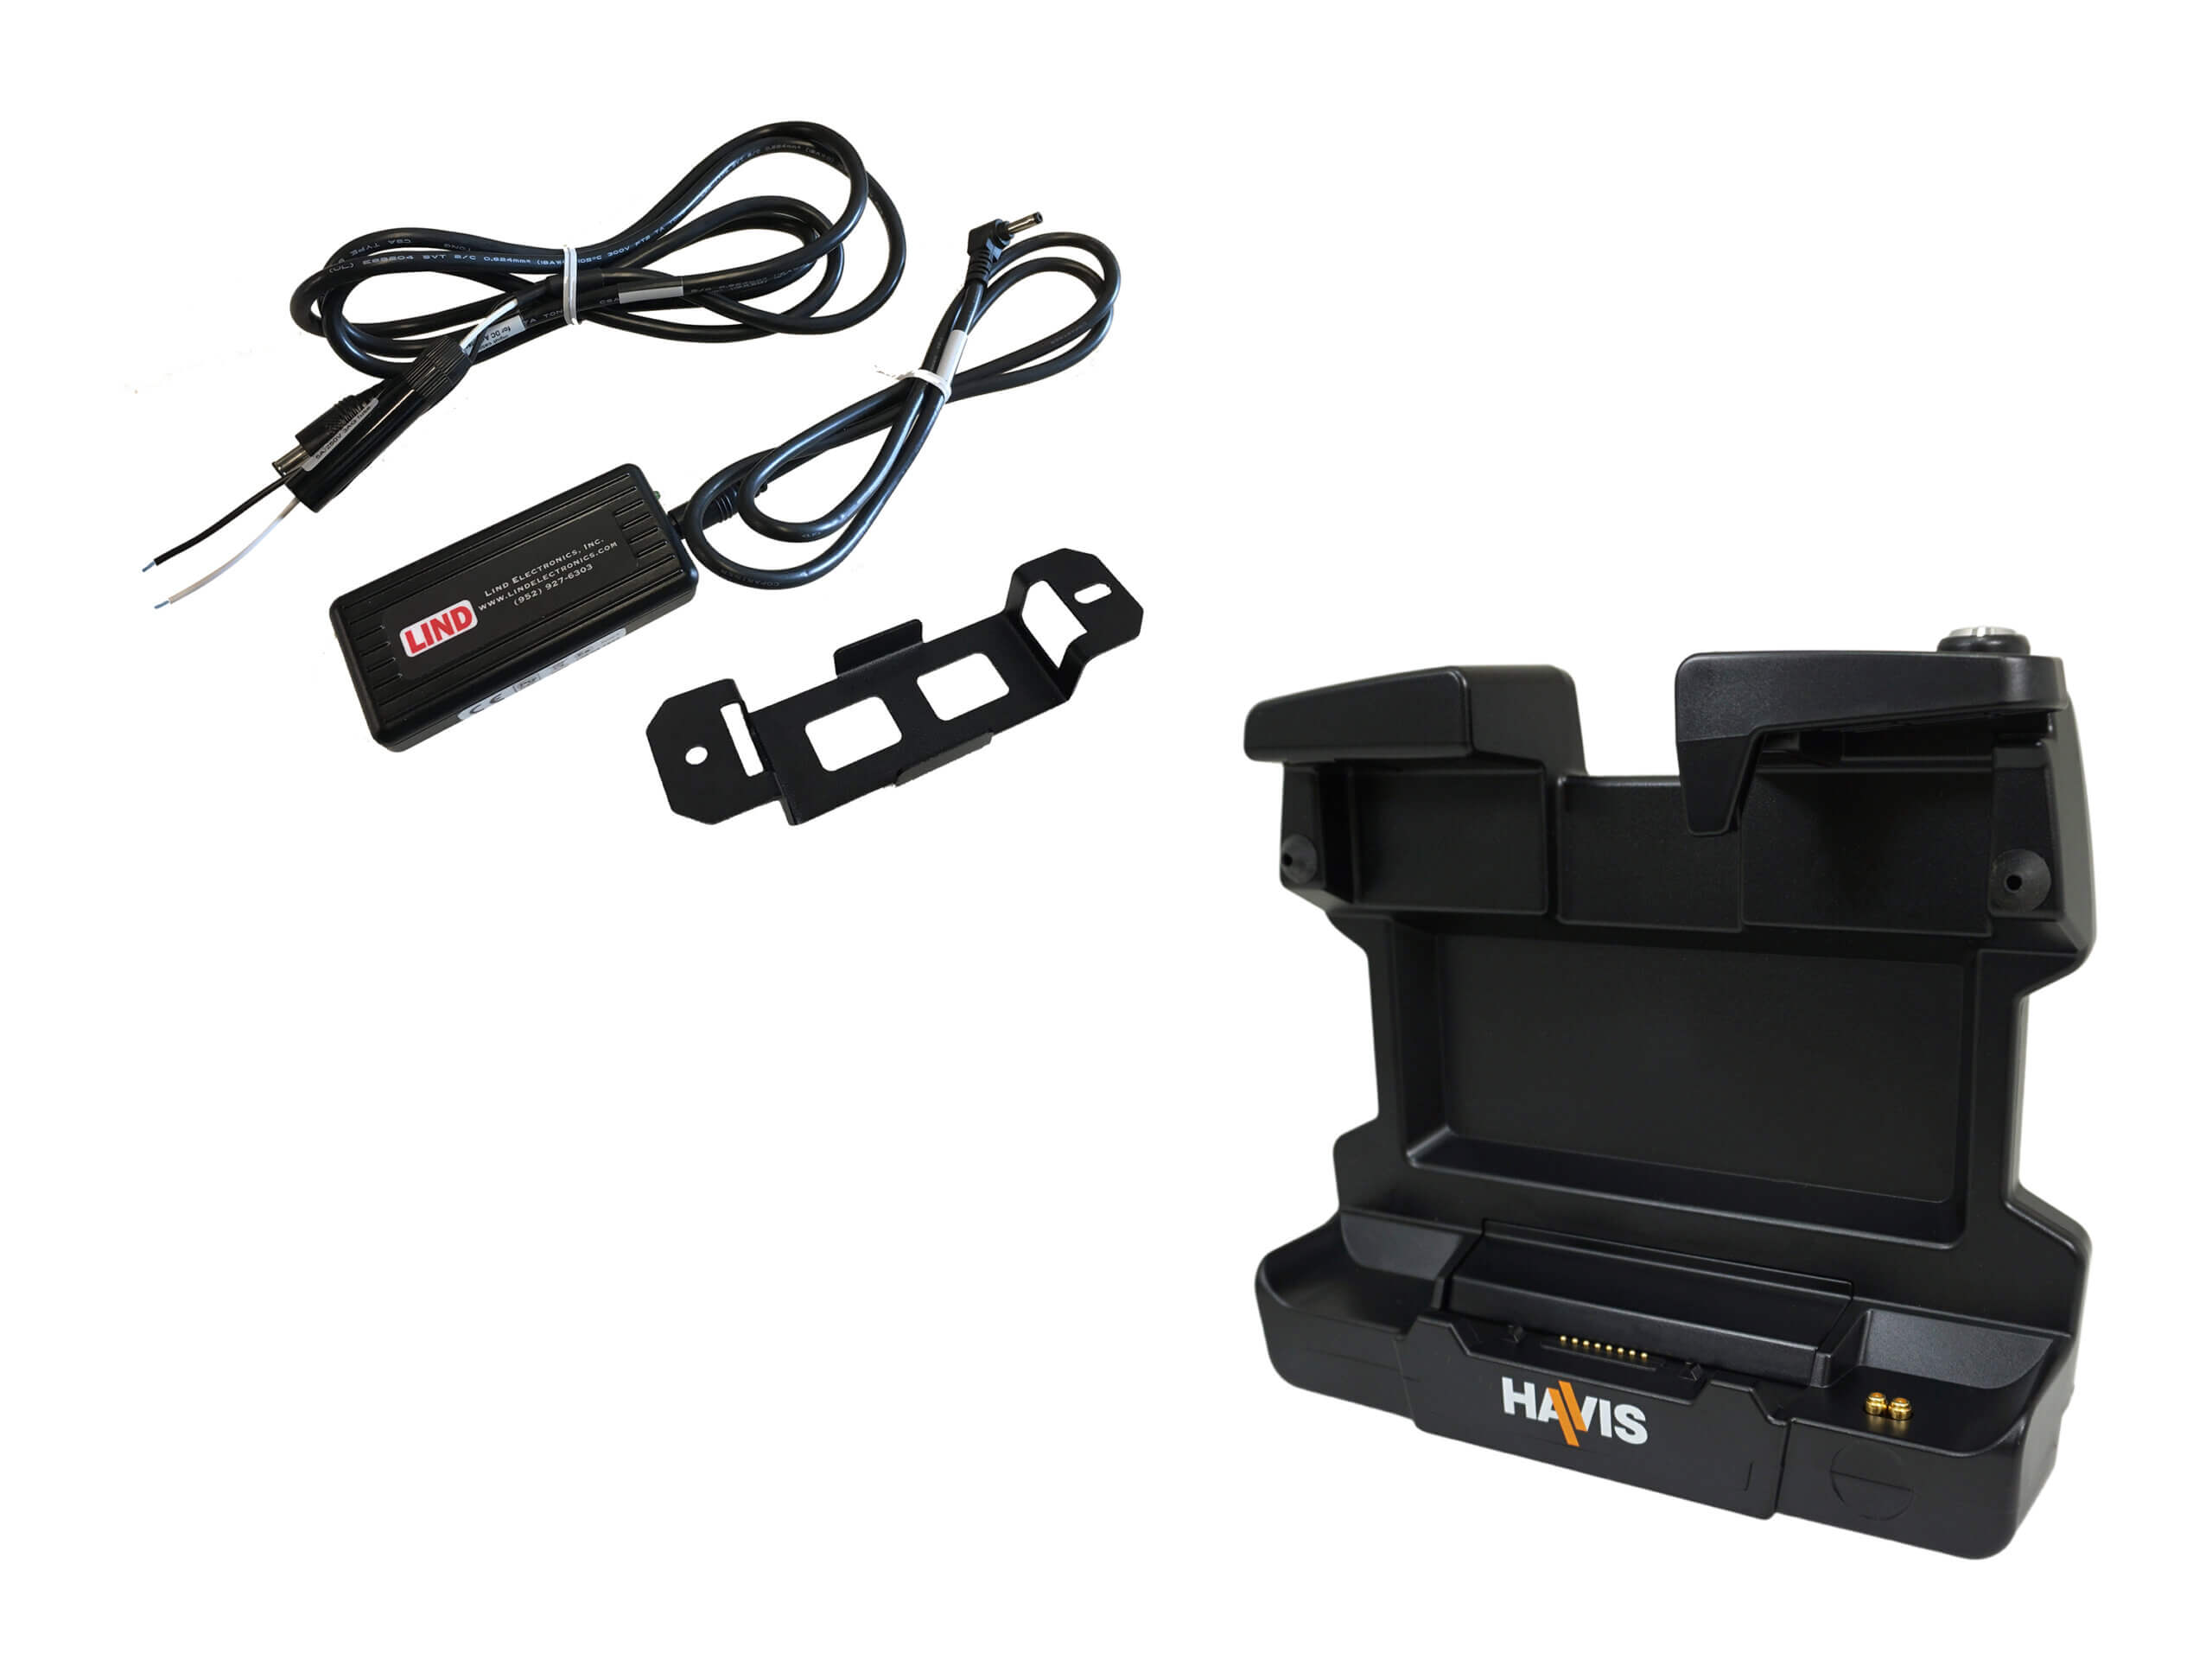 Docking Station For Panasonic TOUGHBOOK S1 Tablet With Dual Pass-Thru Antenna Connections & LIND Power Supply